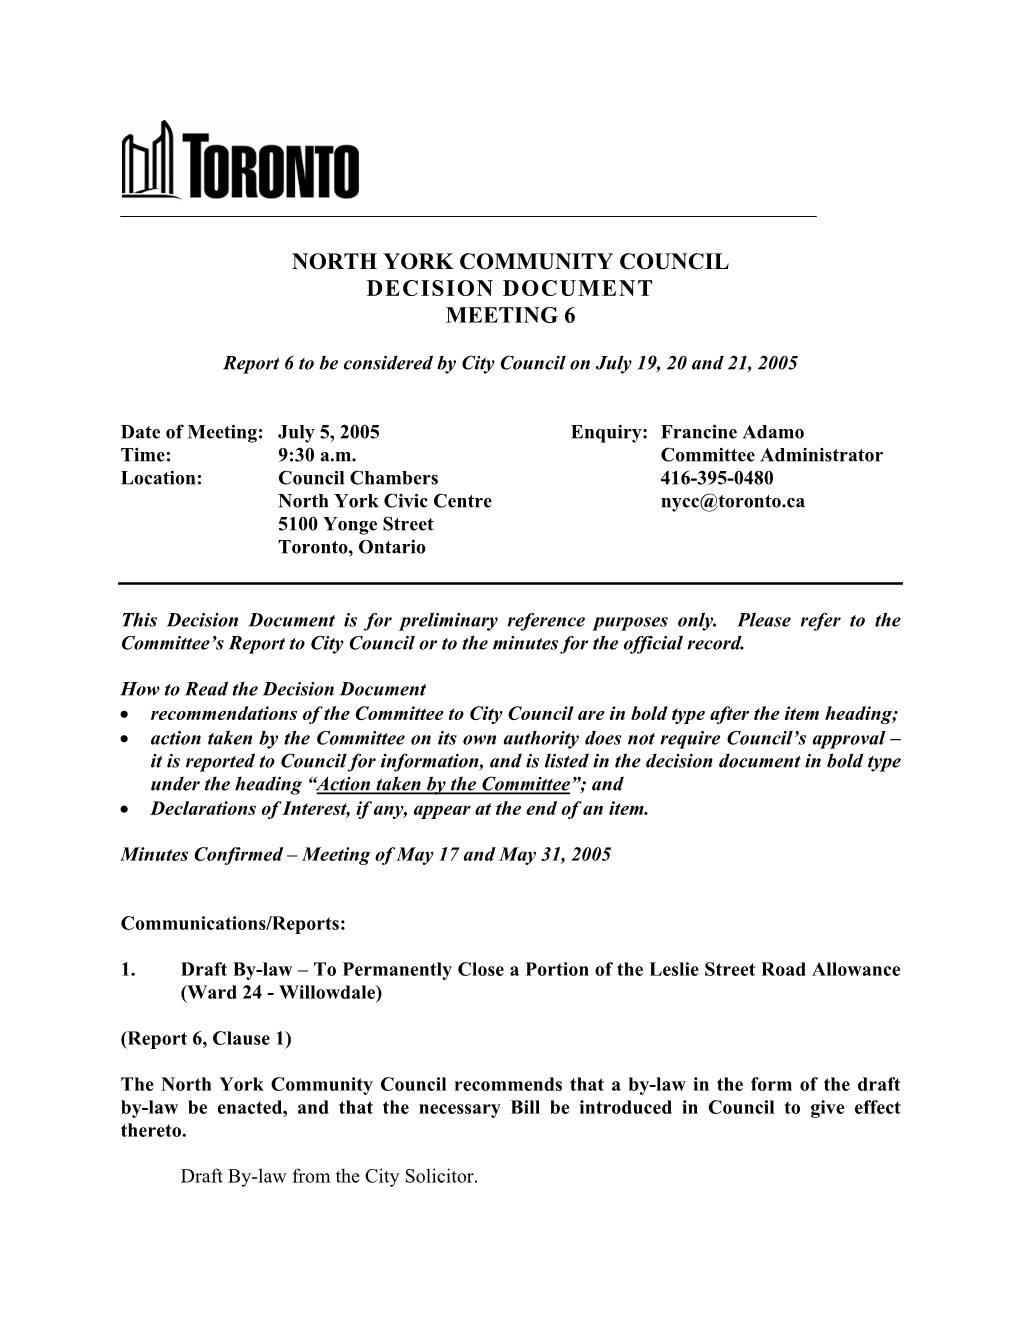 North York Community Council Decision Document Meeting 6